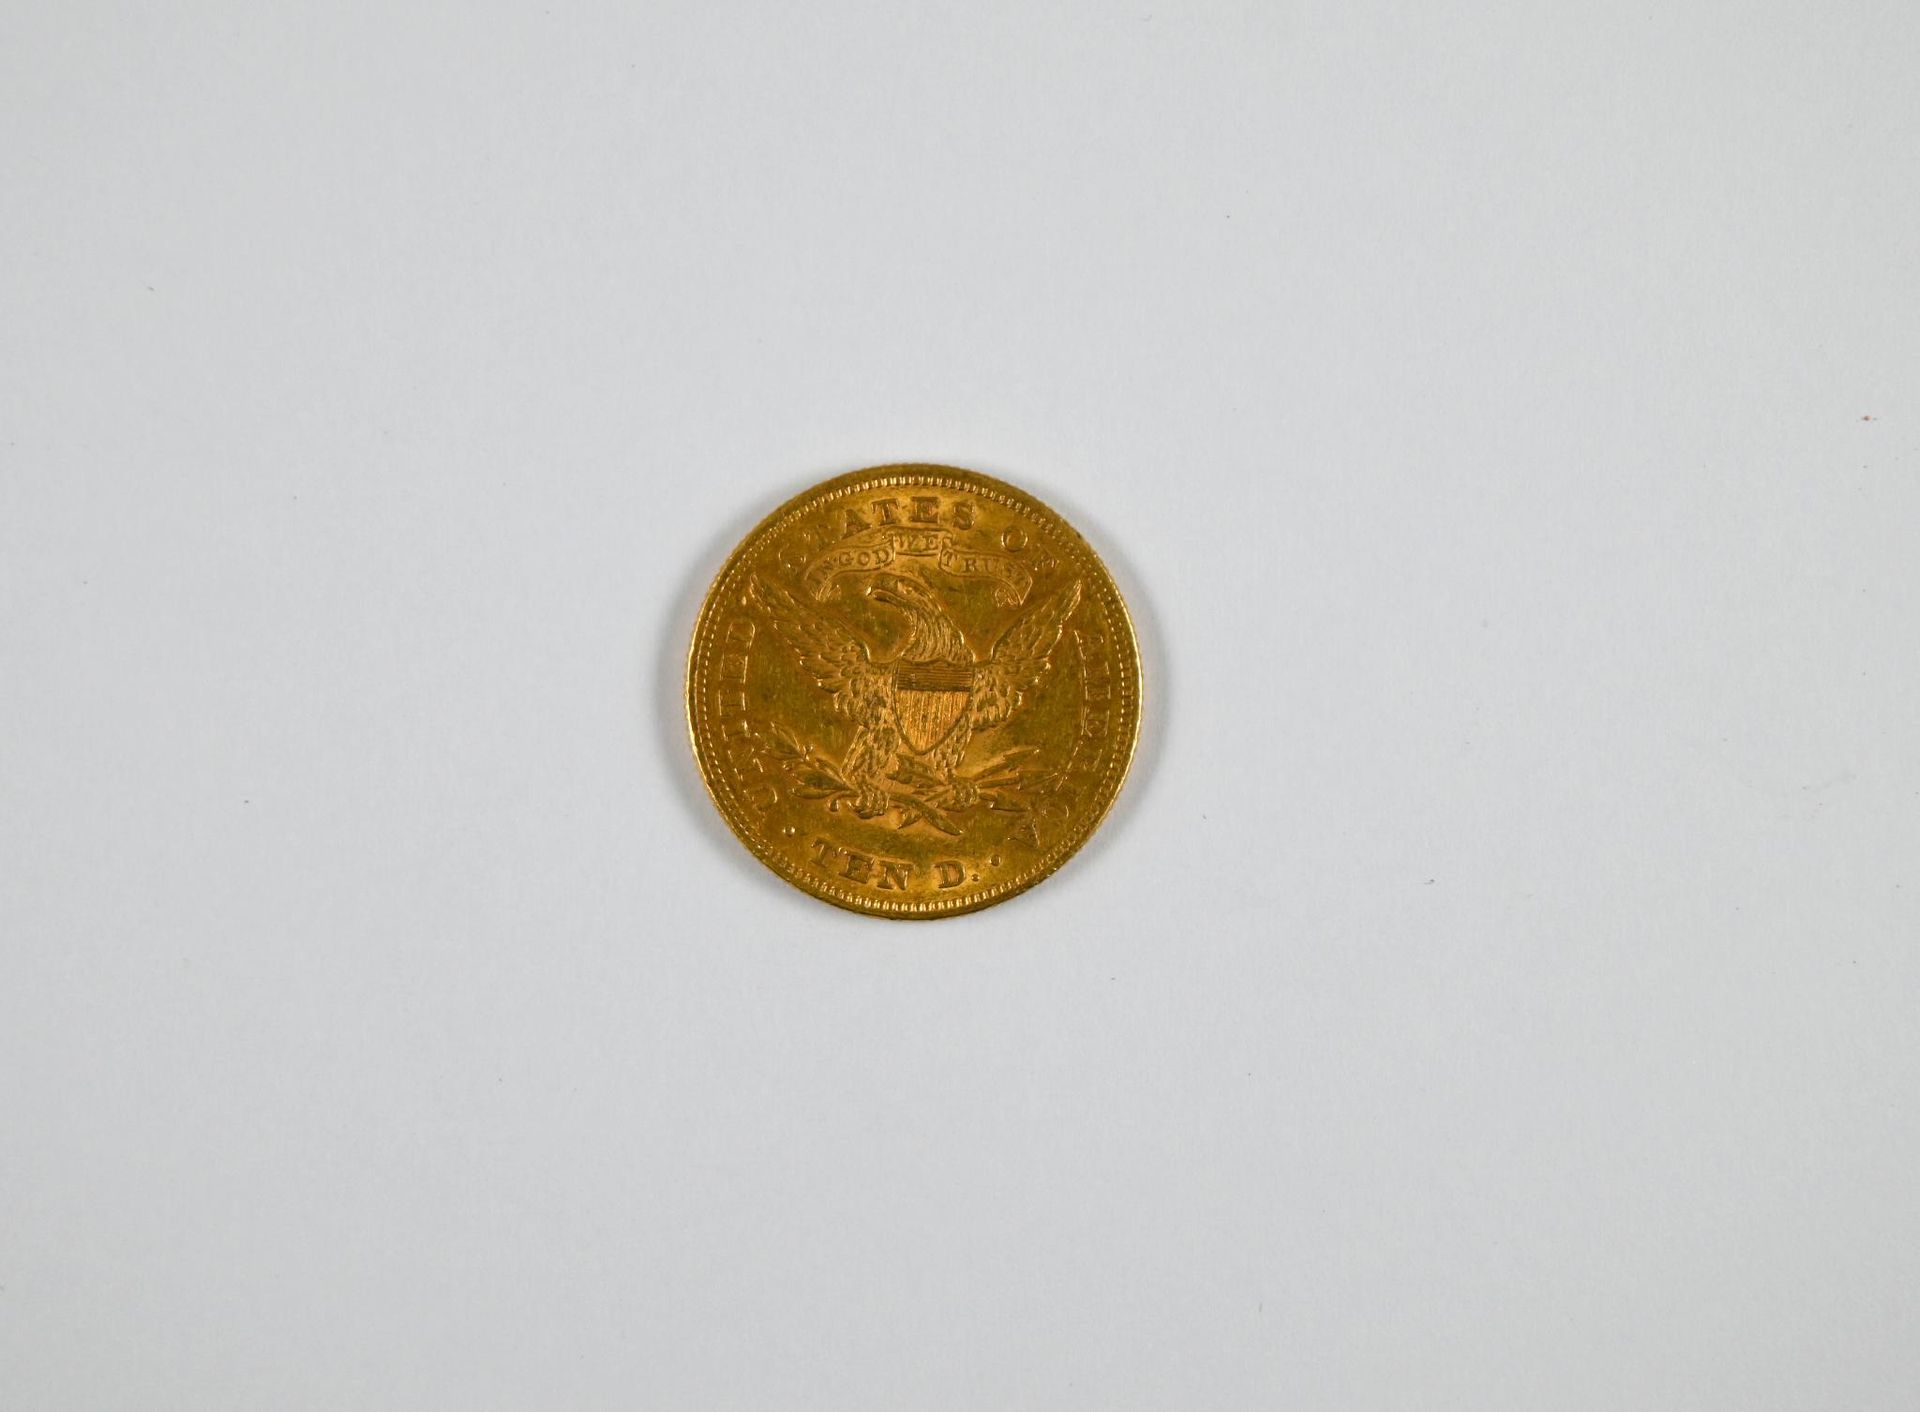 Null (x1) $10 American gold coin 1879 - CHARGES REDUCED TO 13.5% ex VAT